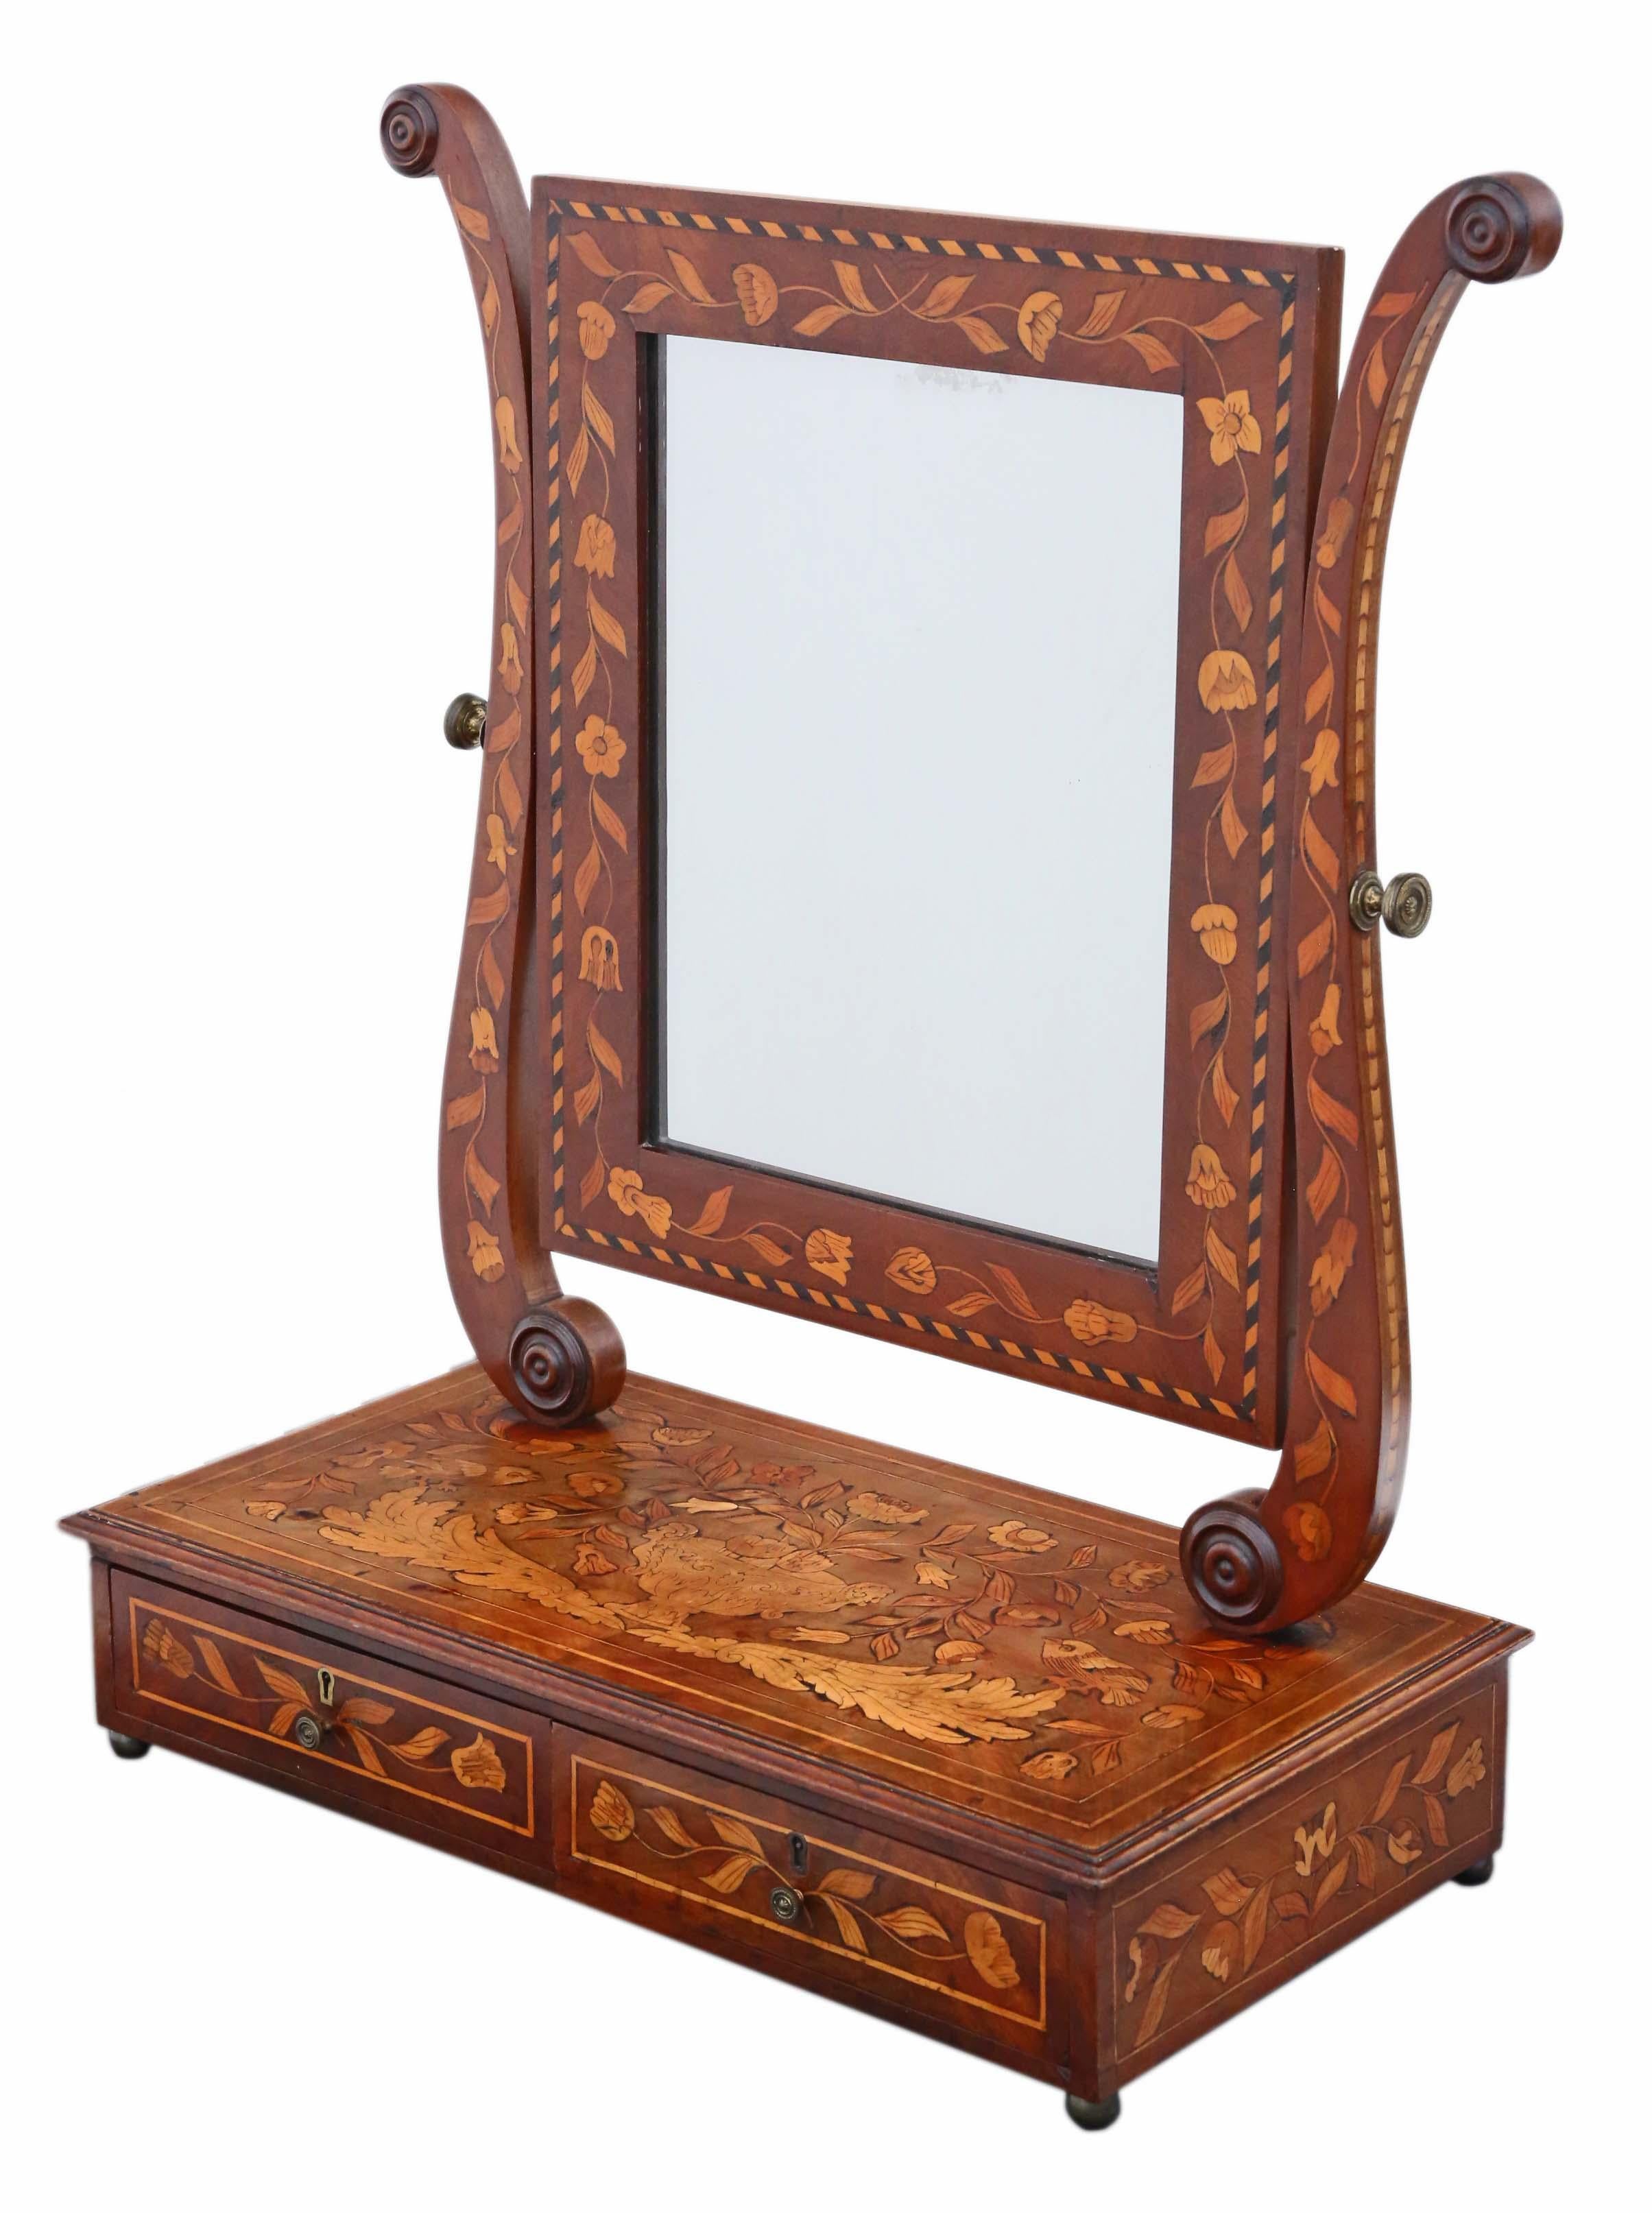 Antique fine quality 19th century marquetry dressing table, swing or toilet mirror. Possibly Dutch origins.

This is a lovely mirror, that is full of age and charm, with great proportions.

No loose joints and no woodworm. Original brass ball